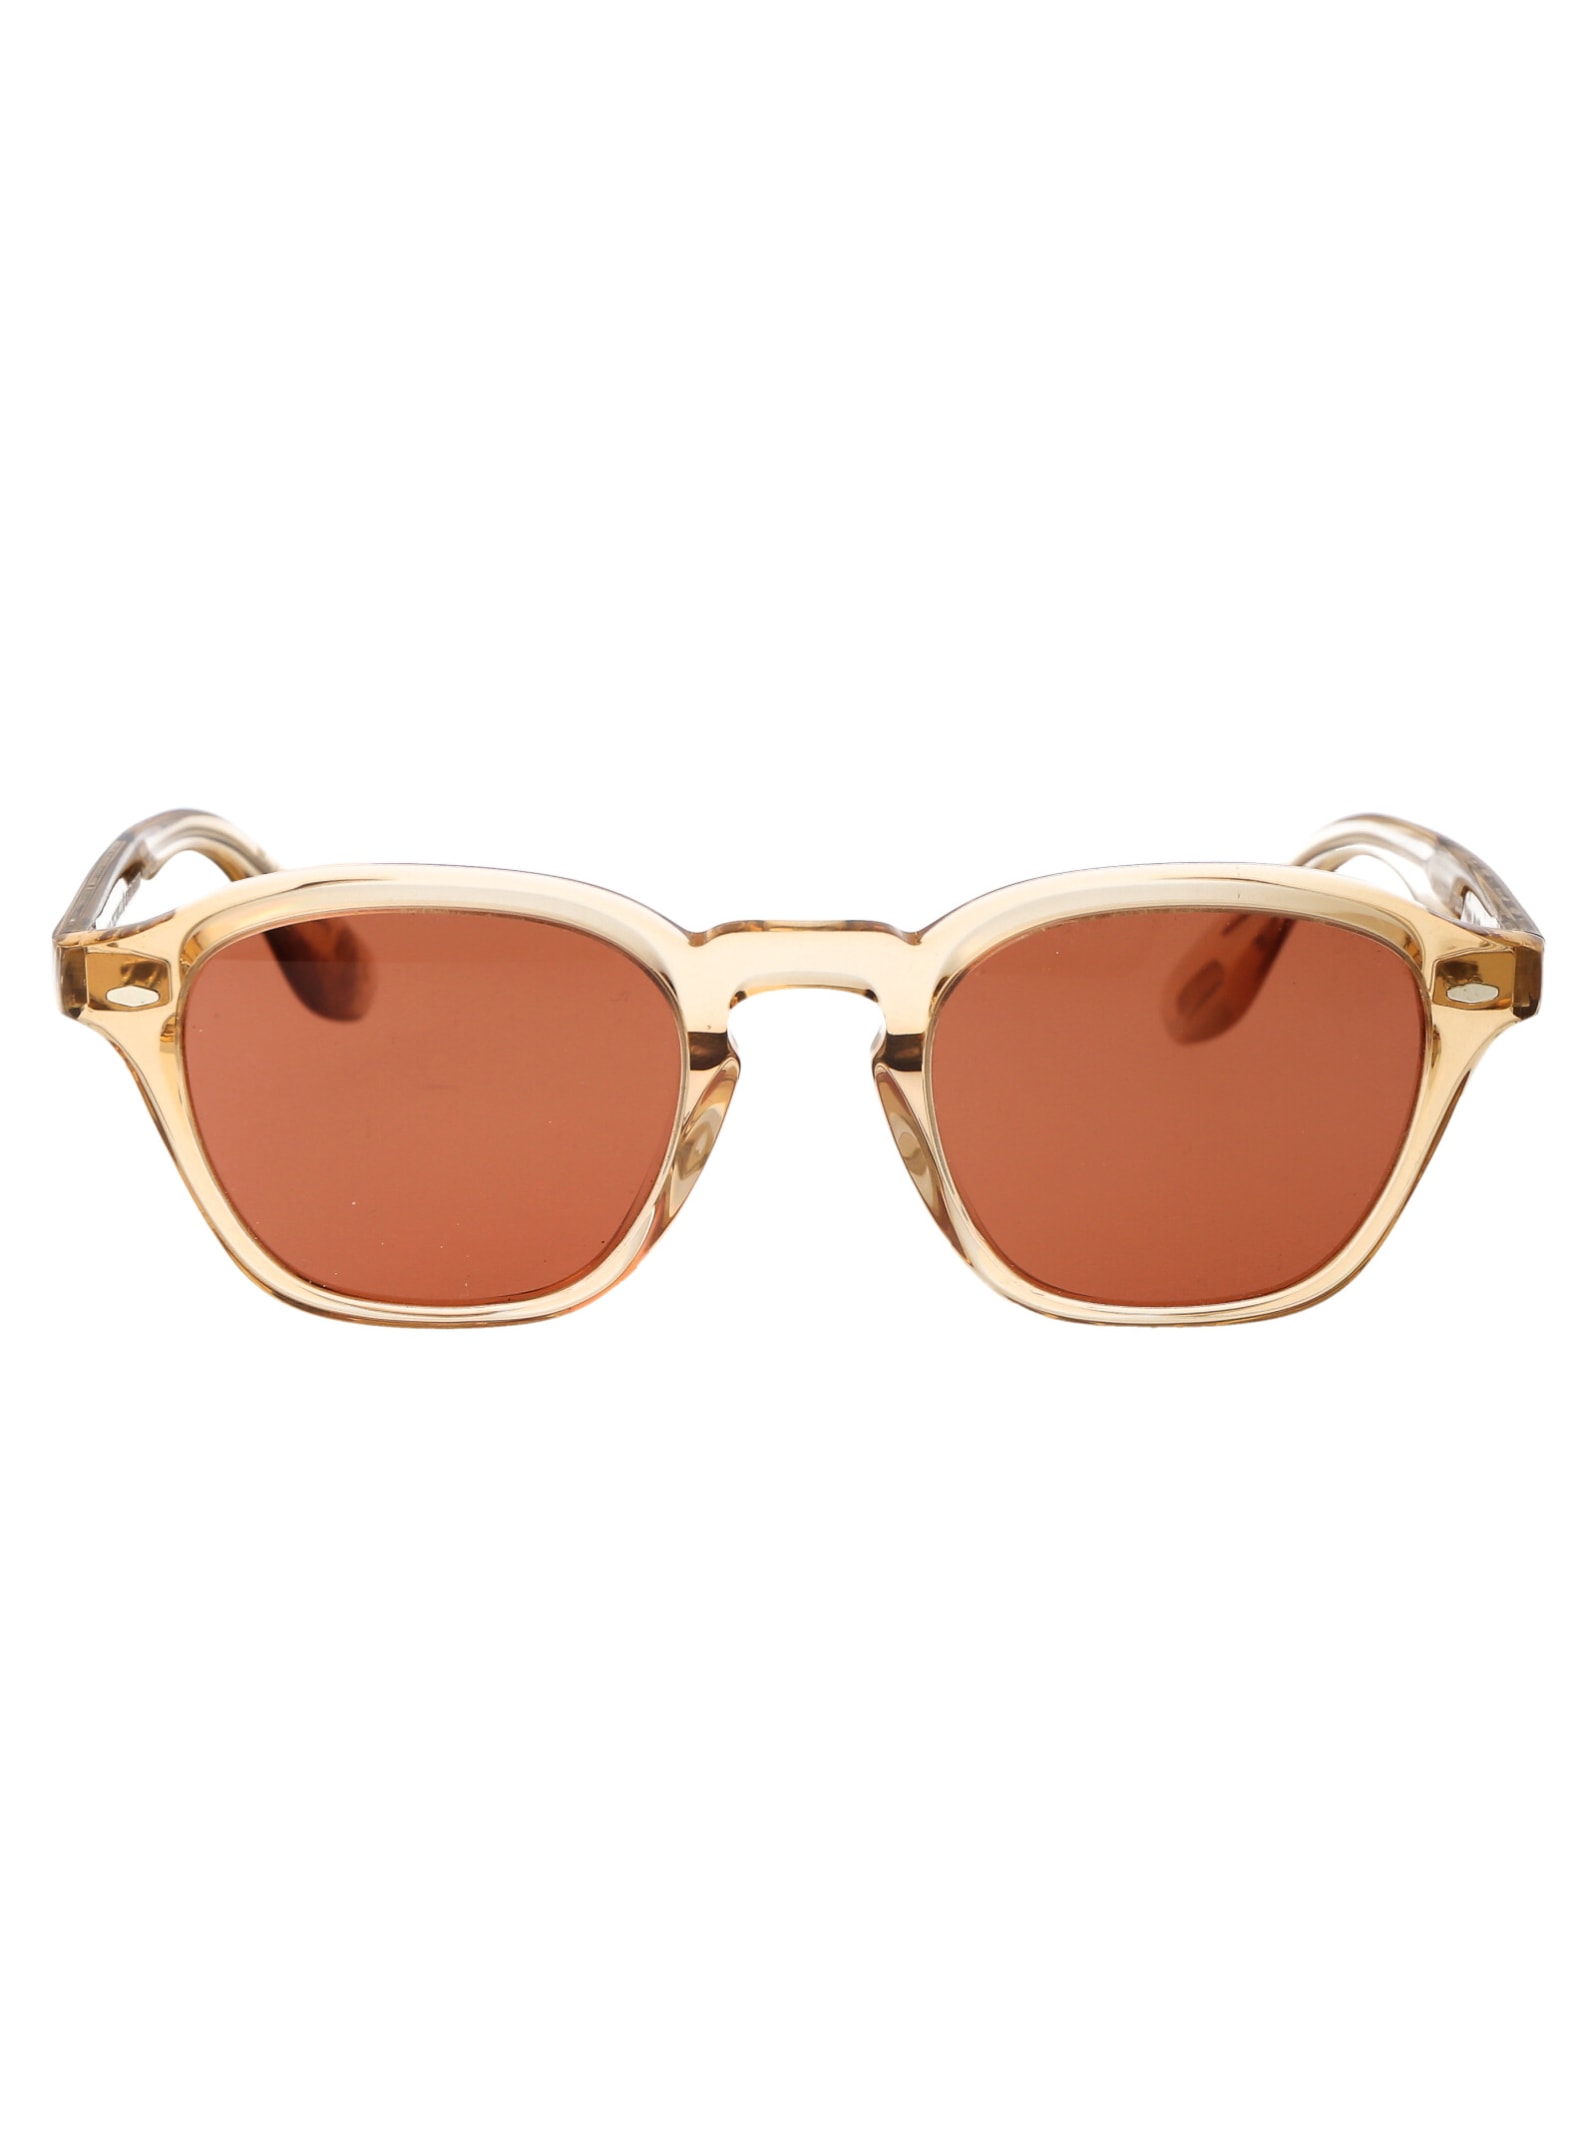 OLIVER PEOPLES PEPPE SUNGLASSES